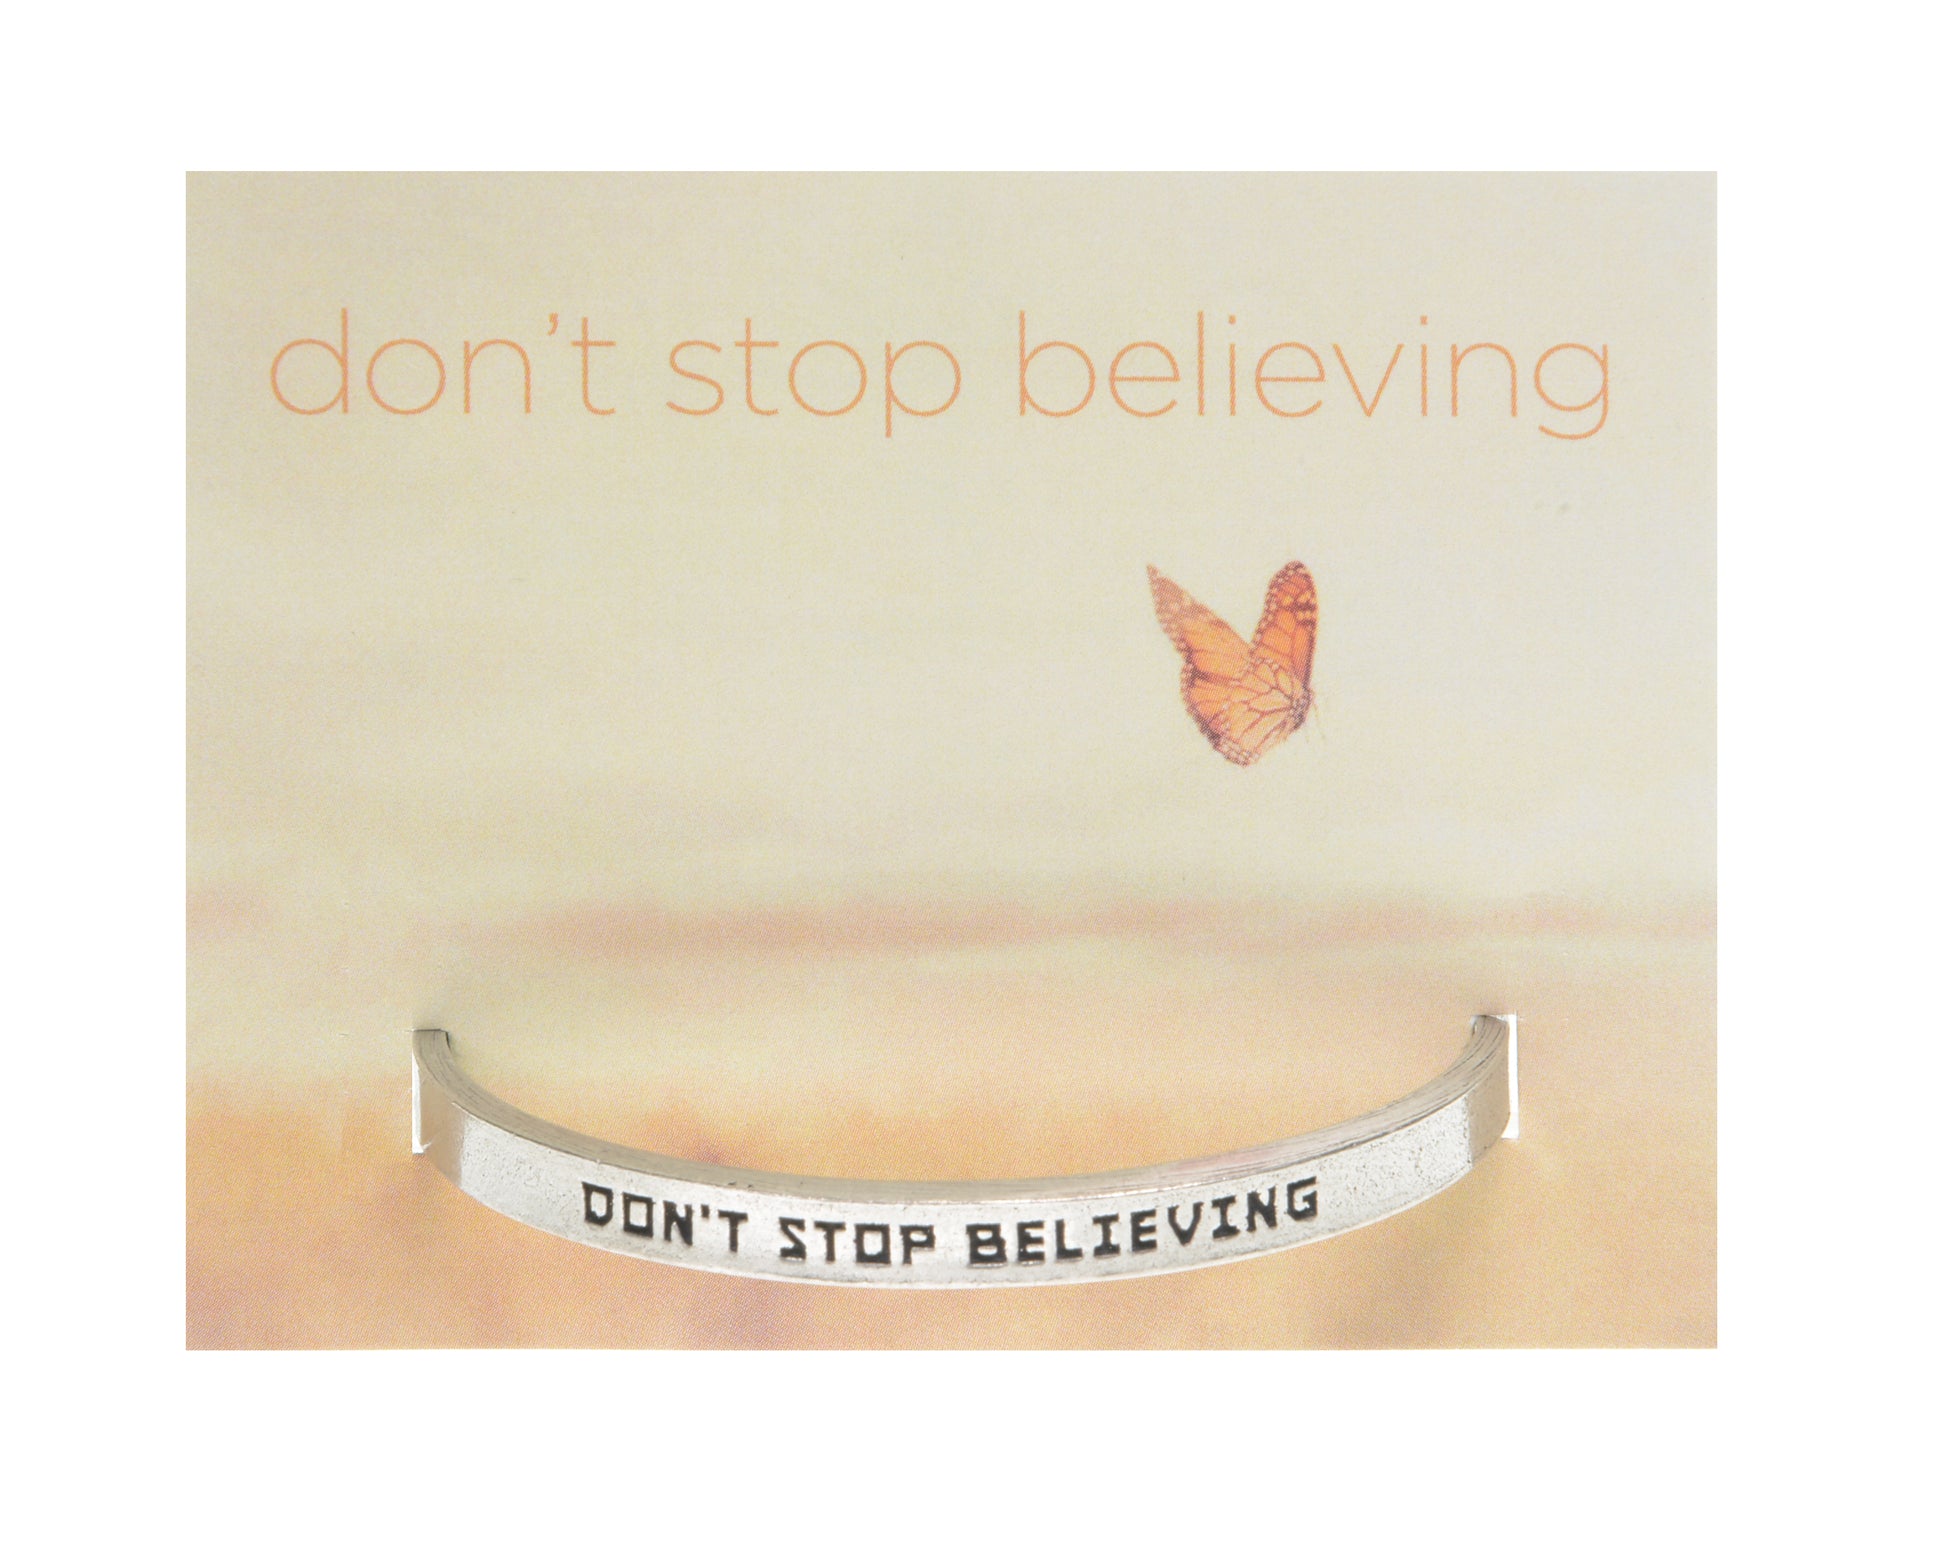 Don't Stop Believing Quotable Cuff Bracelet on backer card